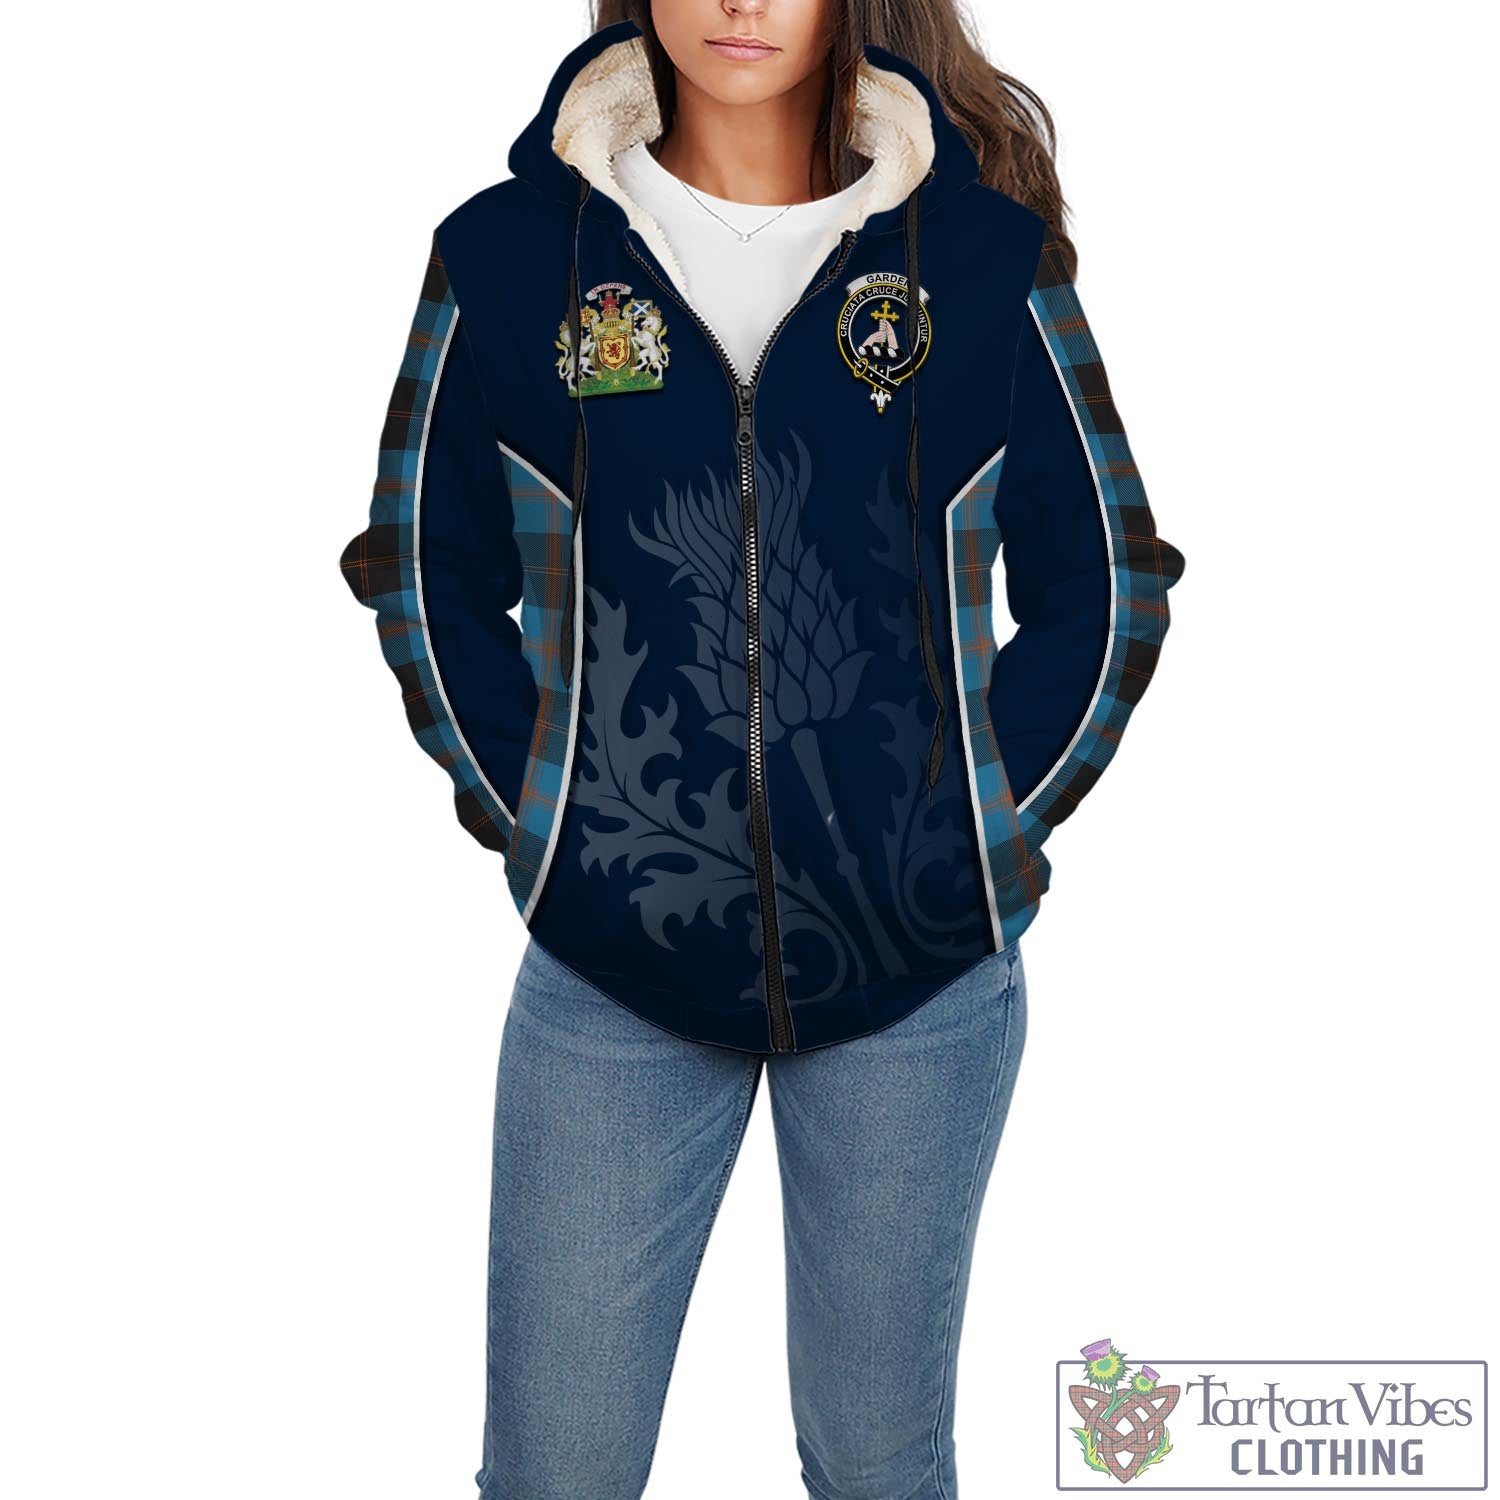 Tartan Vibes Clothing Garden Tartan Sherpa Hoodie with Family Crest and Scottish Thistle Vibes Sport Style